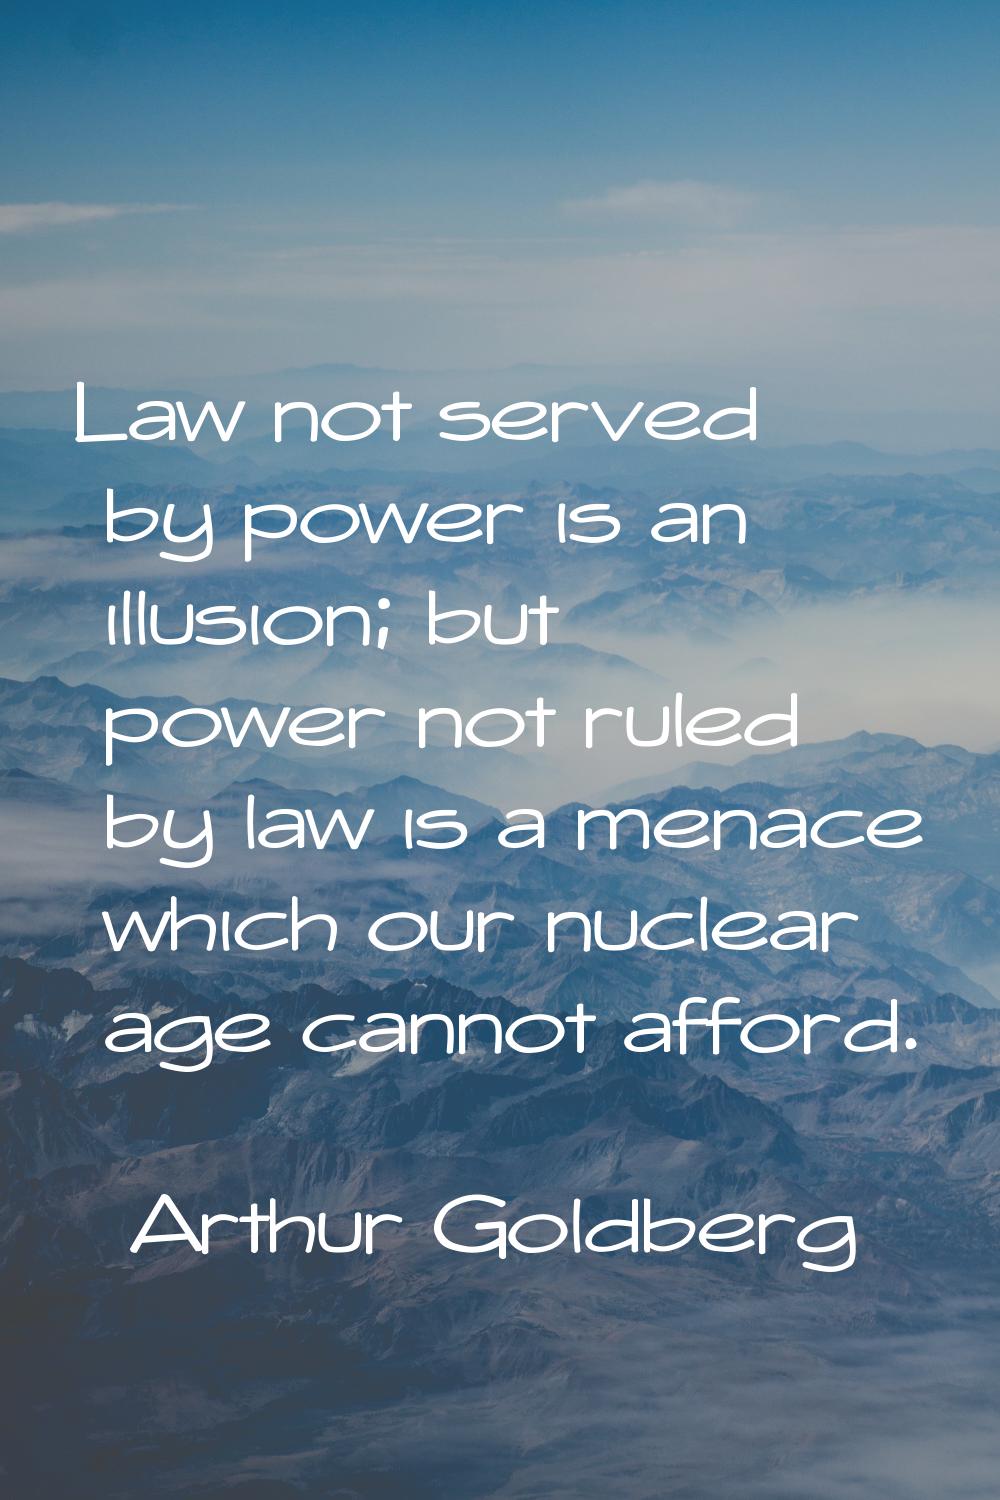 Law not served by power is an illusion; but power not ruled by law is a menace which our nuclear ag